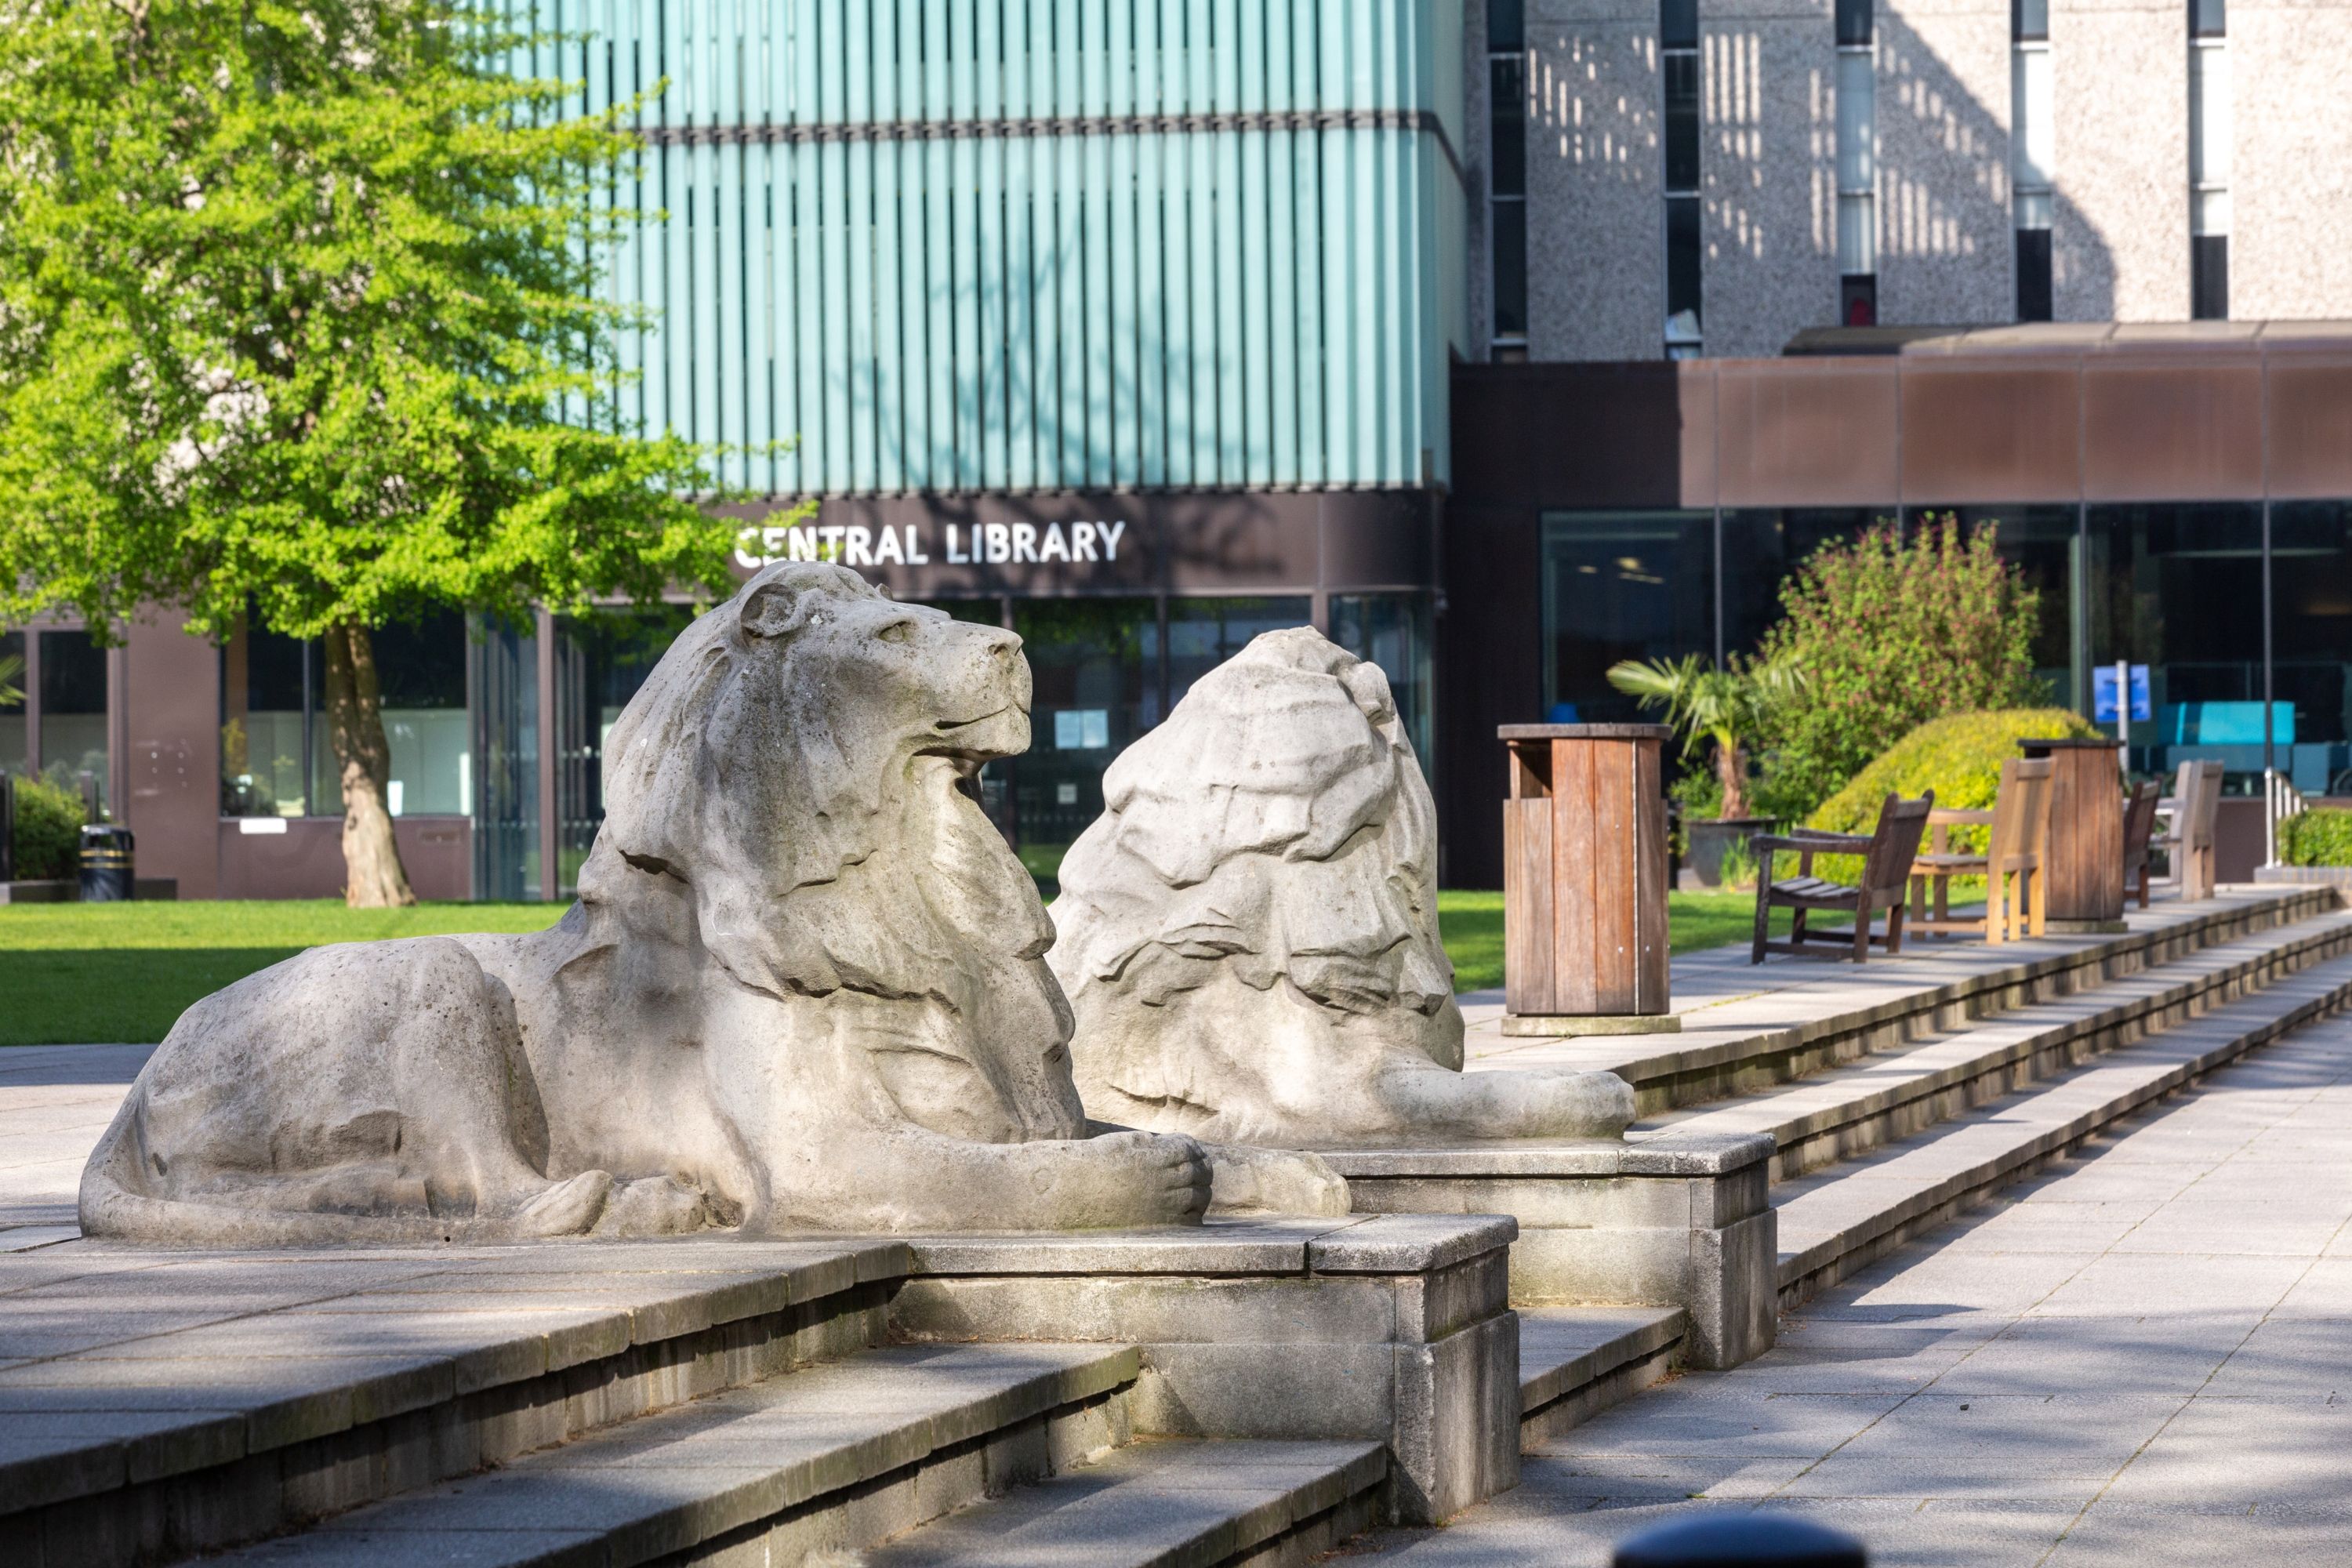 The two Imperial lions and the library